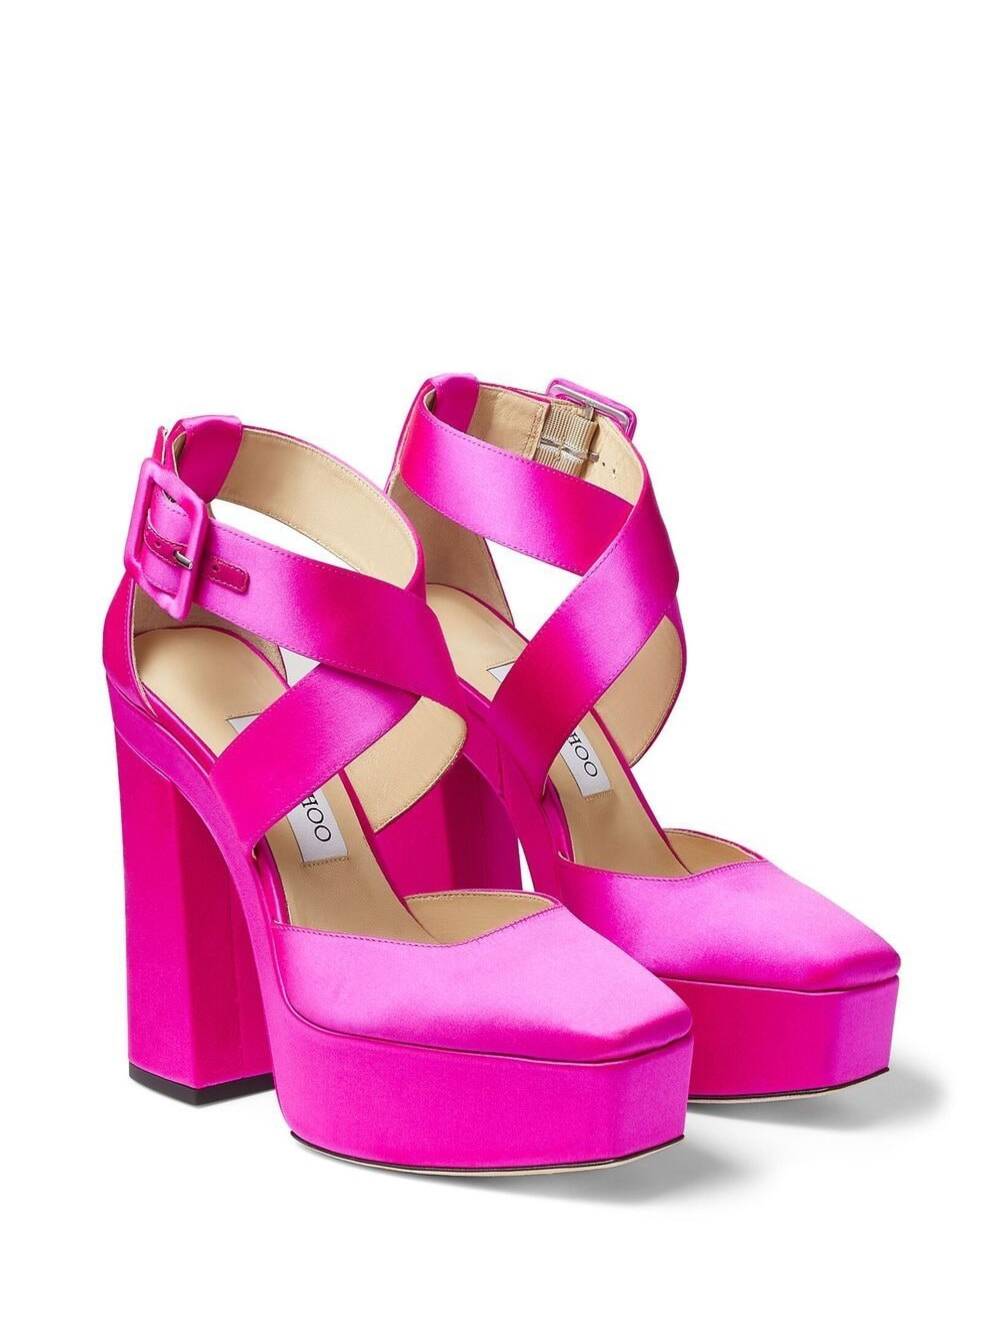 Shop Jimmy Choo Fuchsia Pink Gian Platform Pumps In Satin And Leather Woman